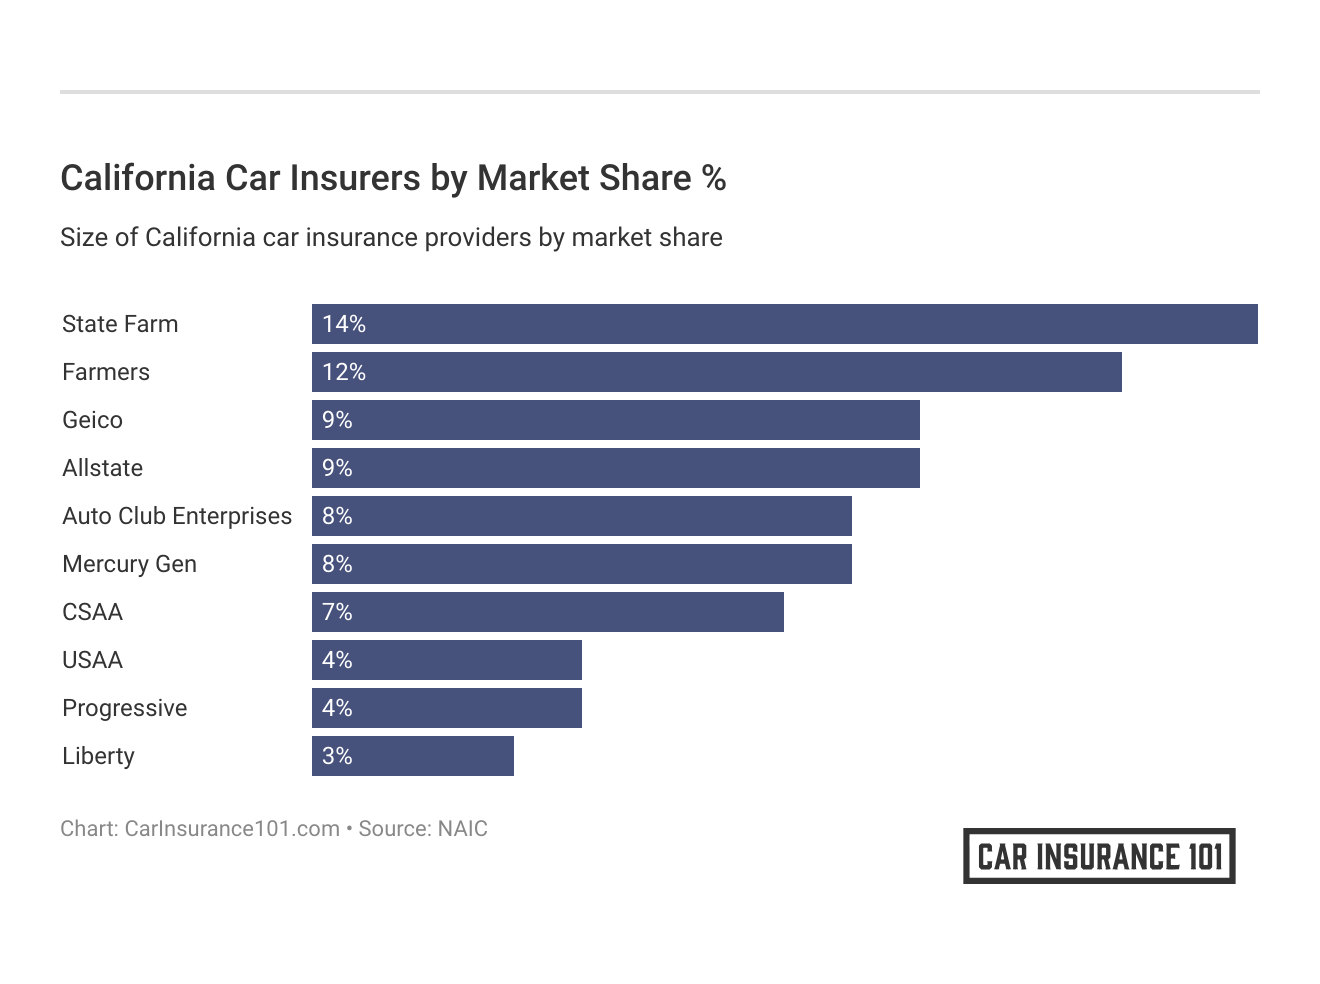 <h3>California Car Insurers by Market Share %</h3>